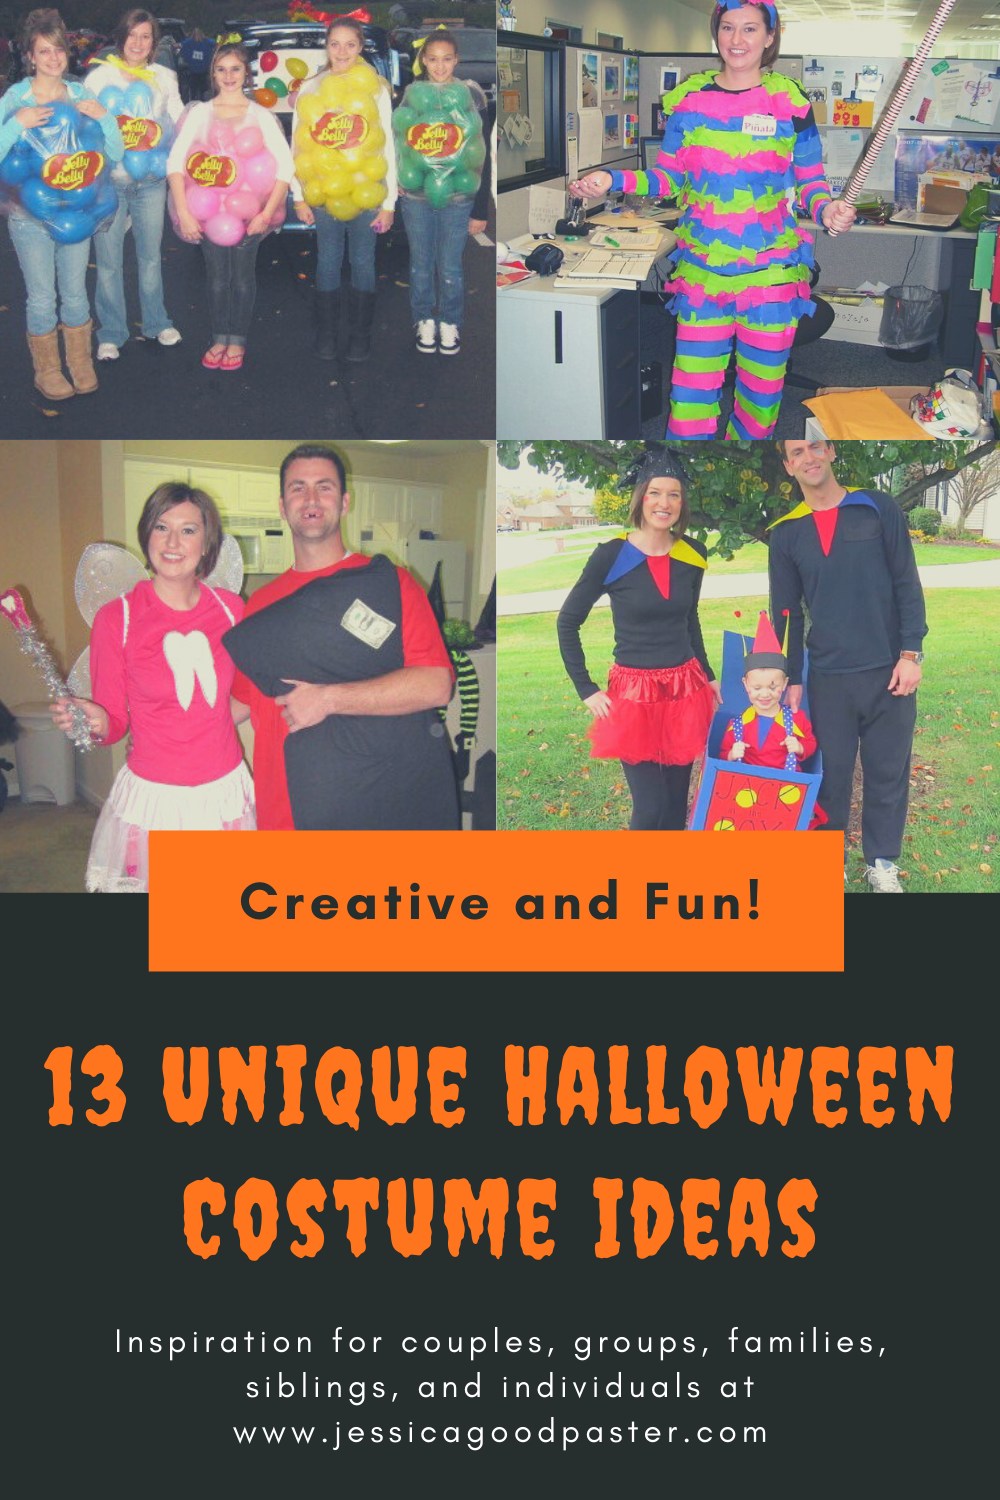 13 Unique Halloween Costume Ideas for You, Your Family, or Group! Find the perfect costume for individuals, couples, families, groups, and kids. Includes some of the best DIY costume ideas as well. #halloween #costumes #halloweencostumes #couplecostumes #groupcostume #diycostumes #familycostume #trunkortreat